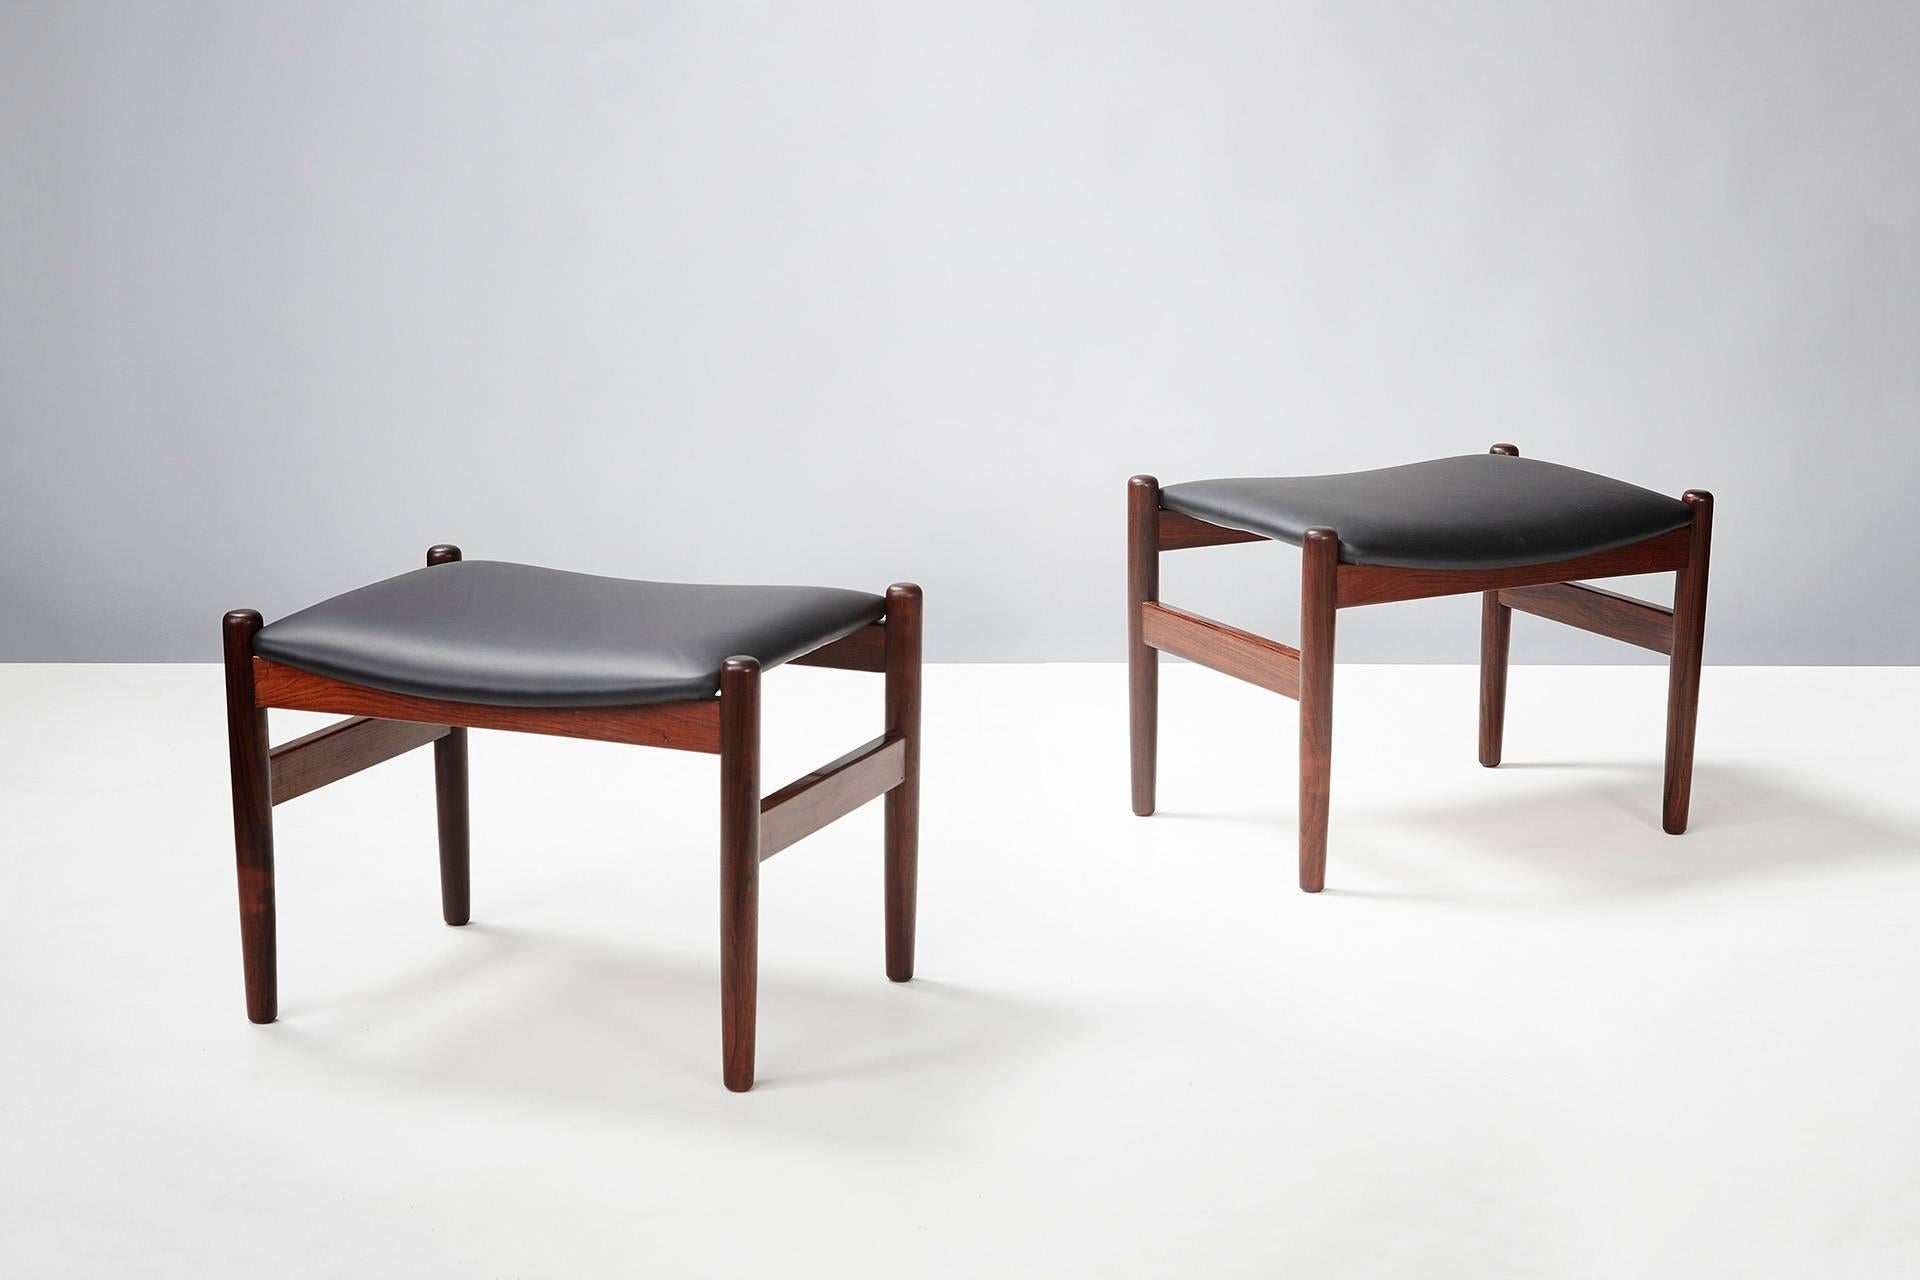 Pair of rosewood stools by an unknown Danish designer. Seats reupholstered in new black leather.